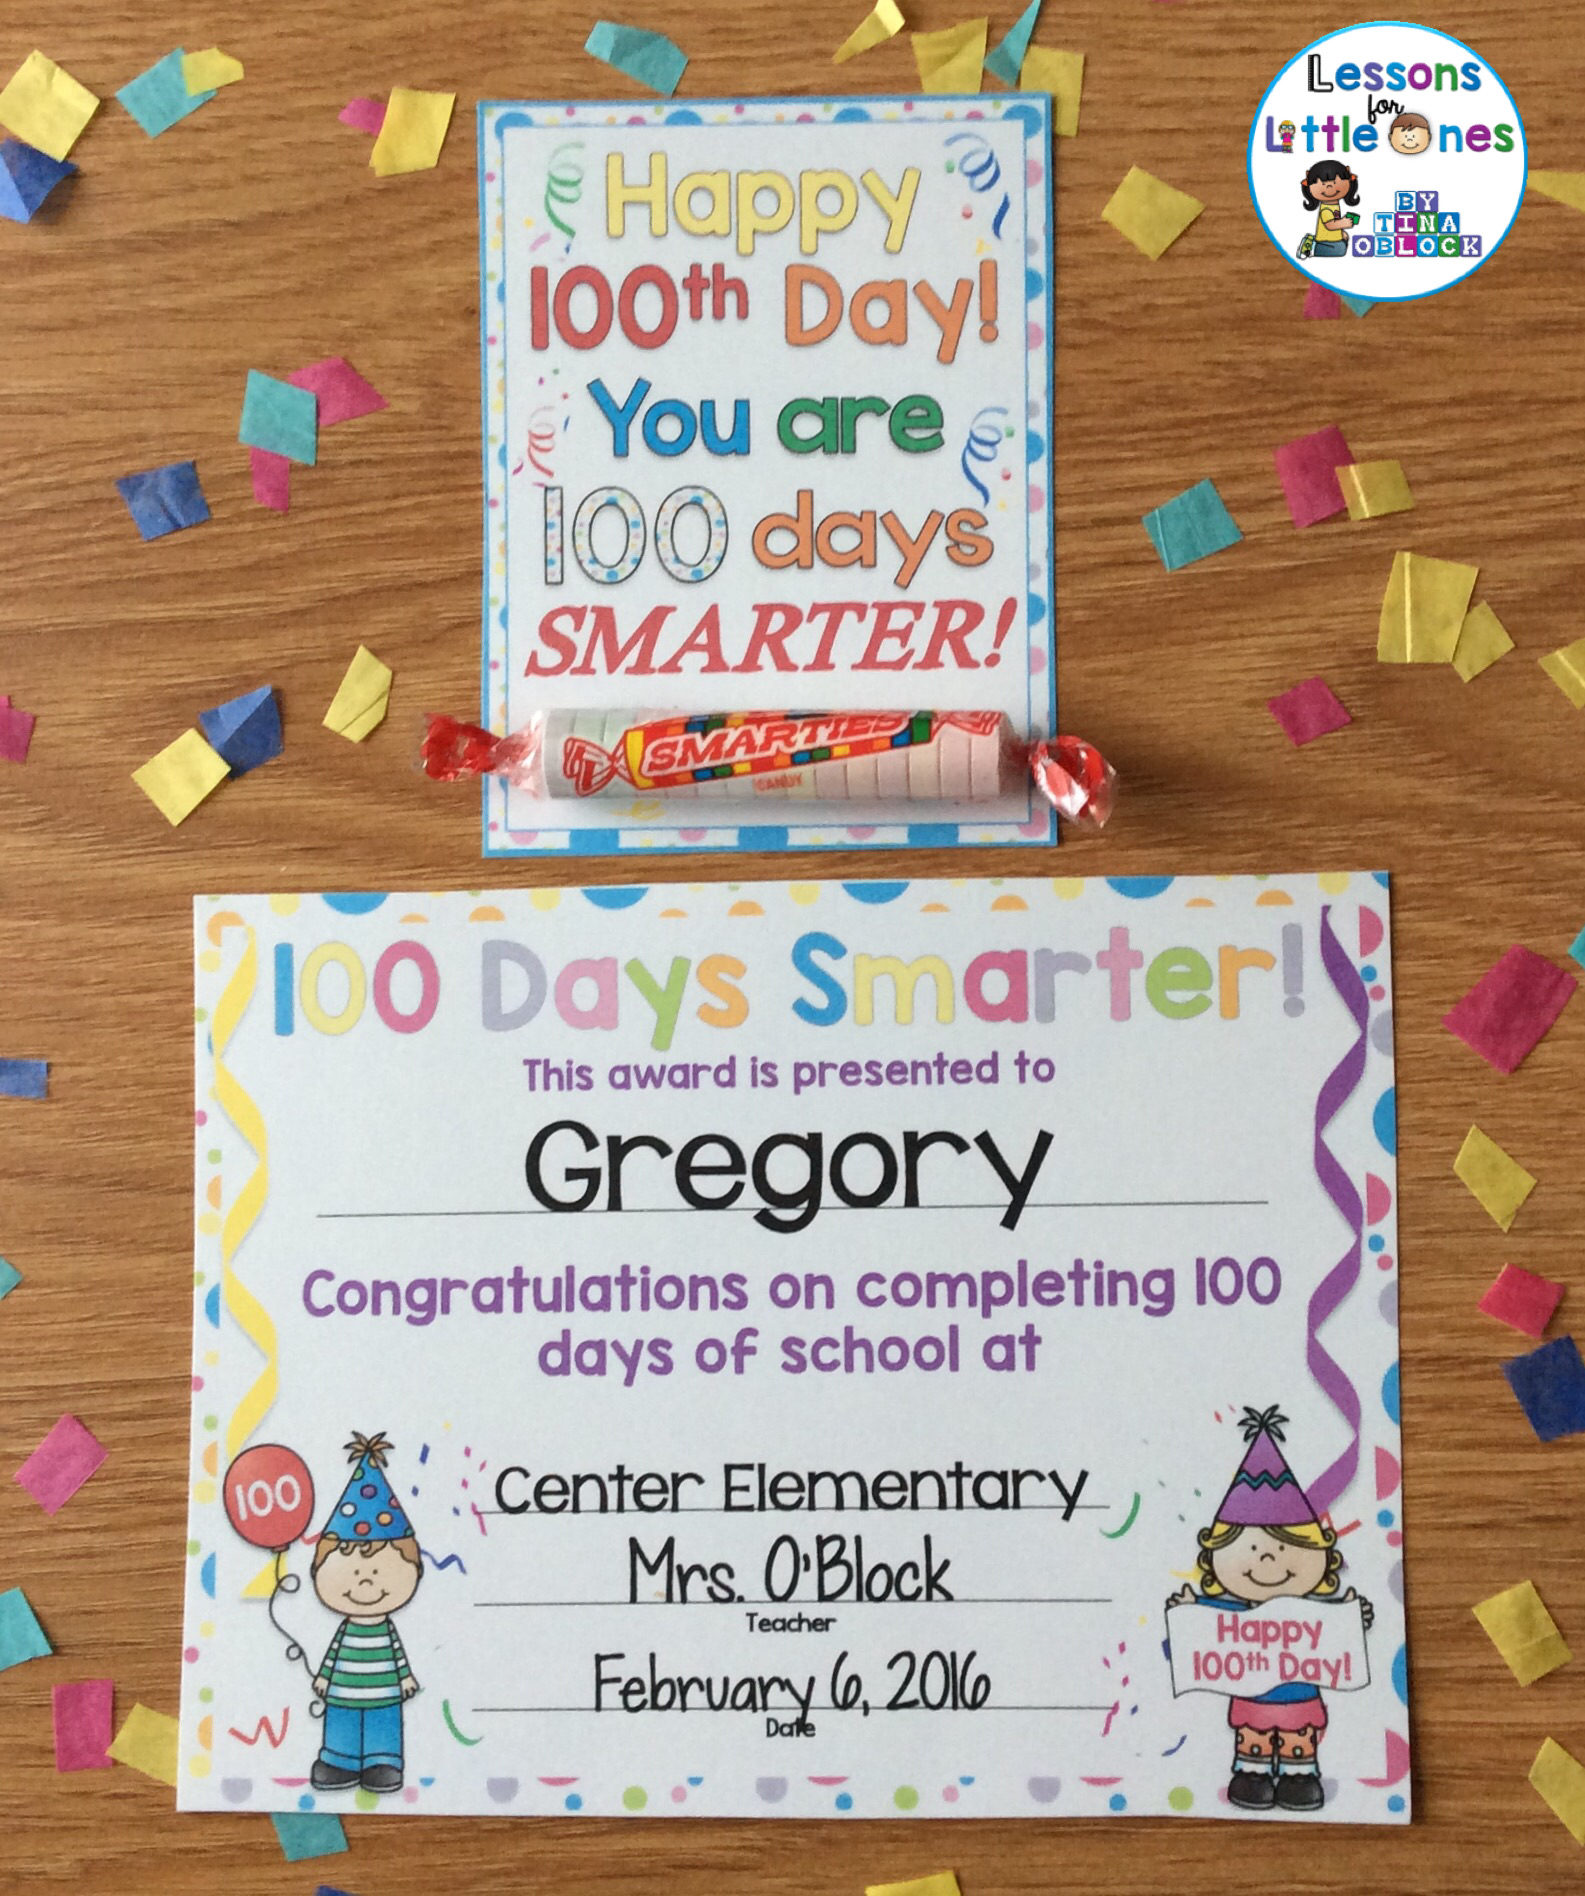 100 Days Smarter treat tag and student award / certificate